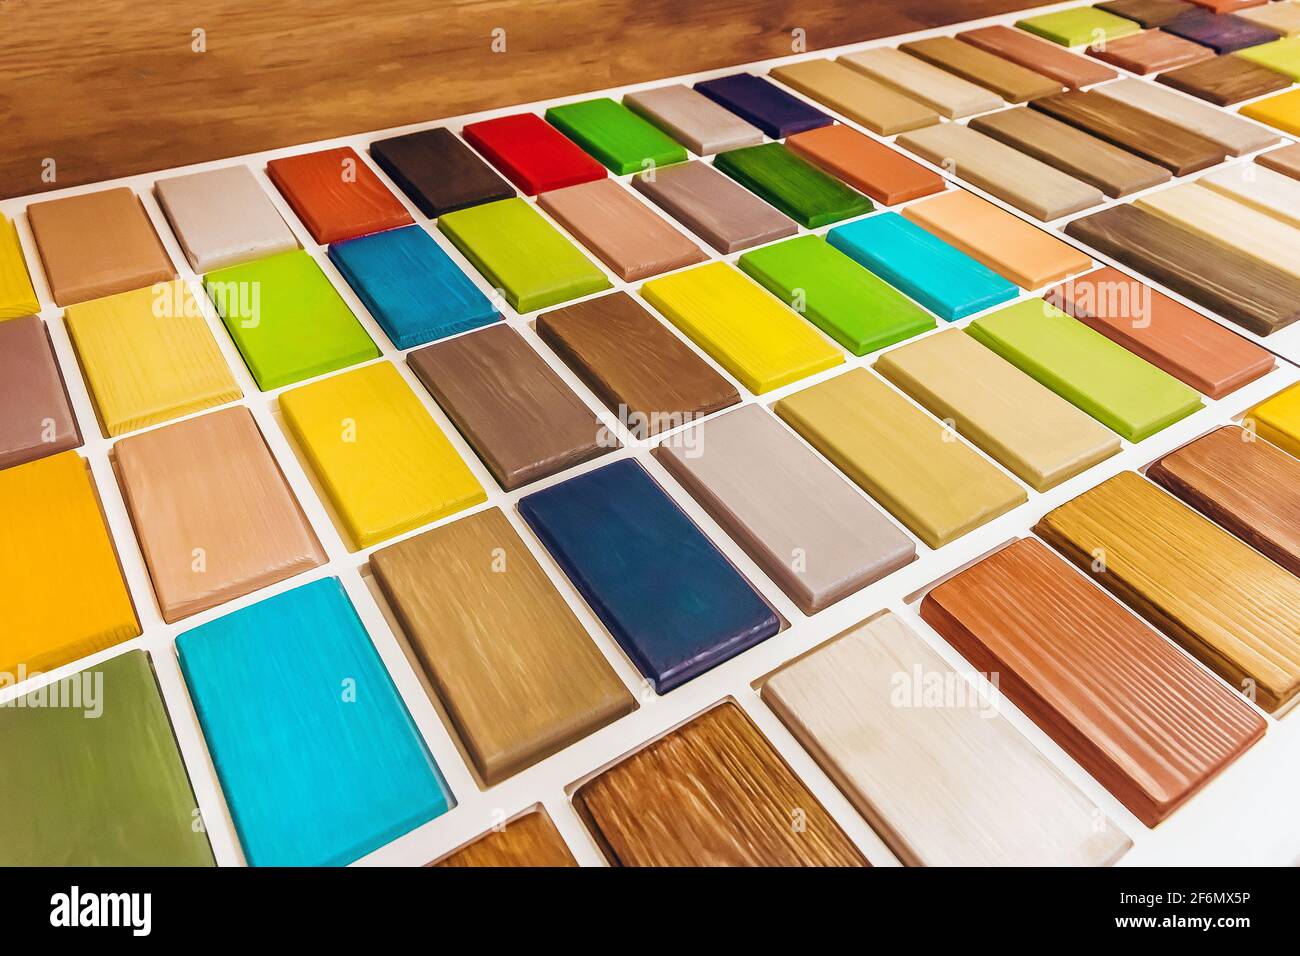 Color samples of paint for wood bars interior design material in a hardware store. Stock Photo